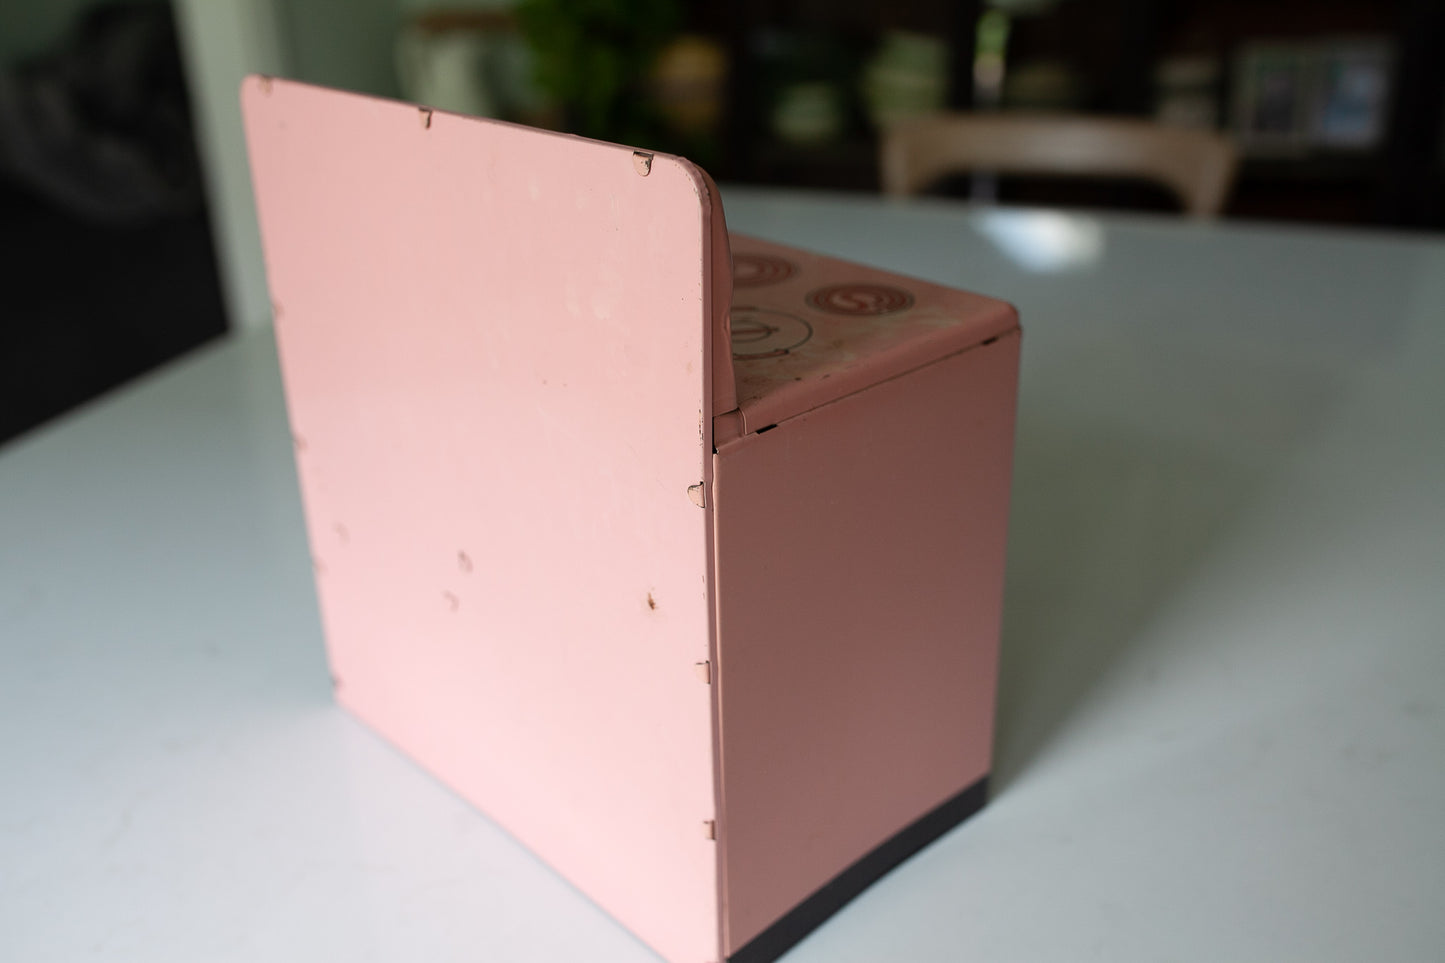 Vintage Pink Oven- Tin Stove- Pink Ovne - Pink Kitchen -Wolverine- Toy Stove